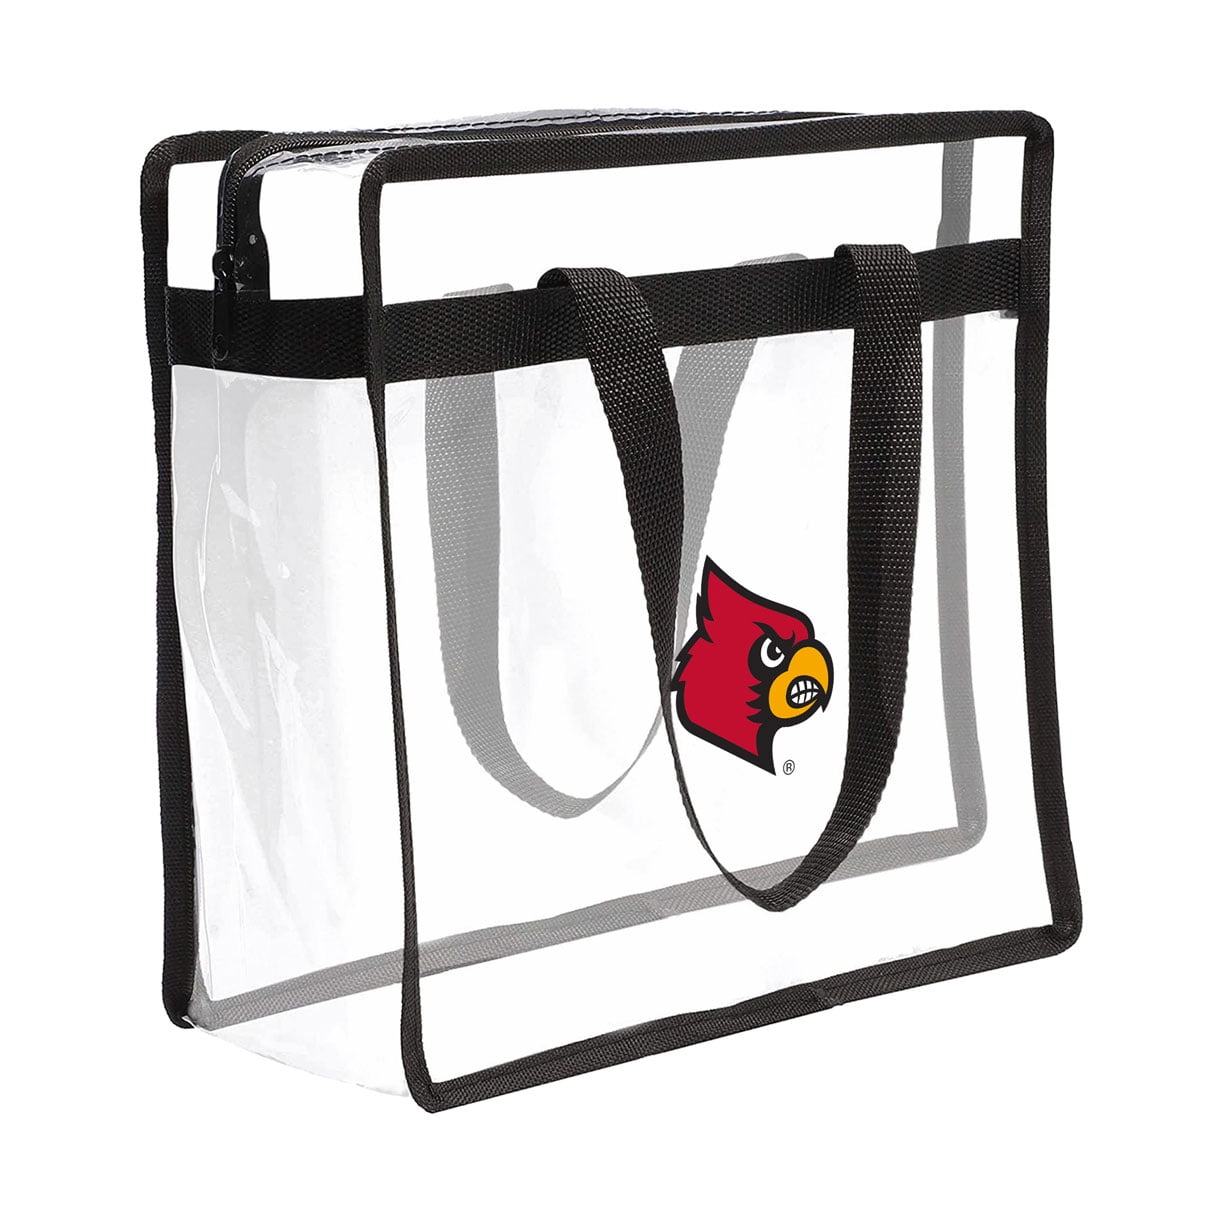 NCAA Louisville Prime Clear Tote Bag